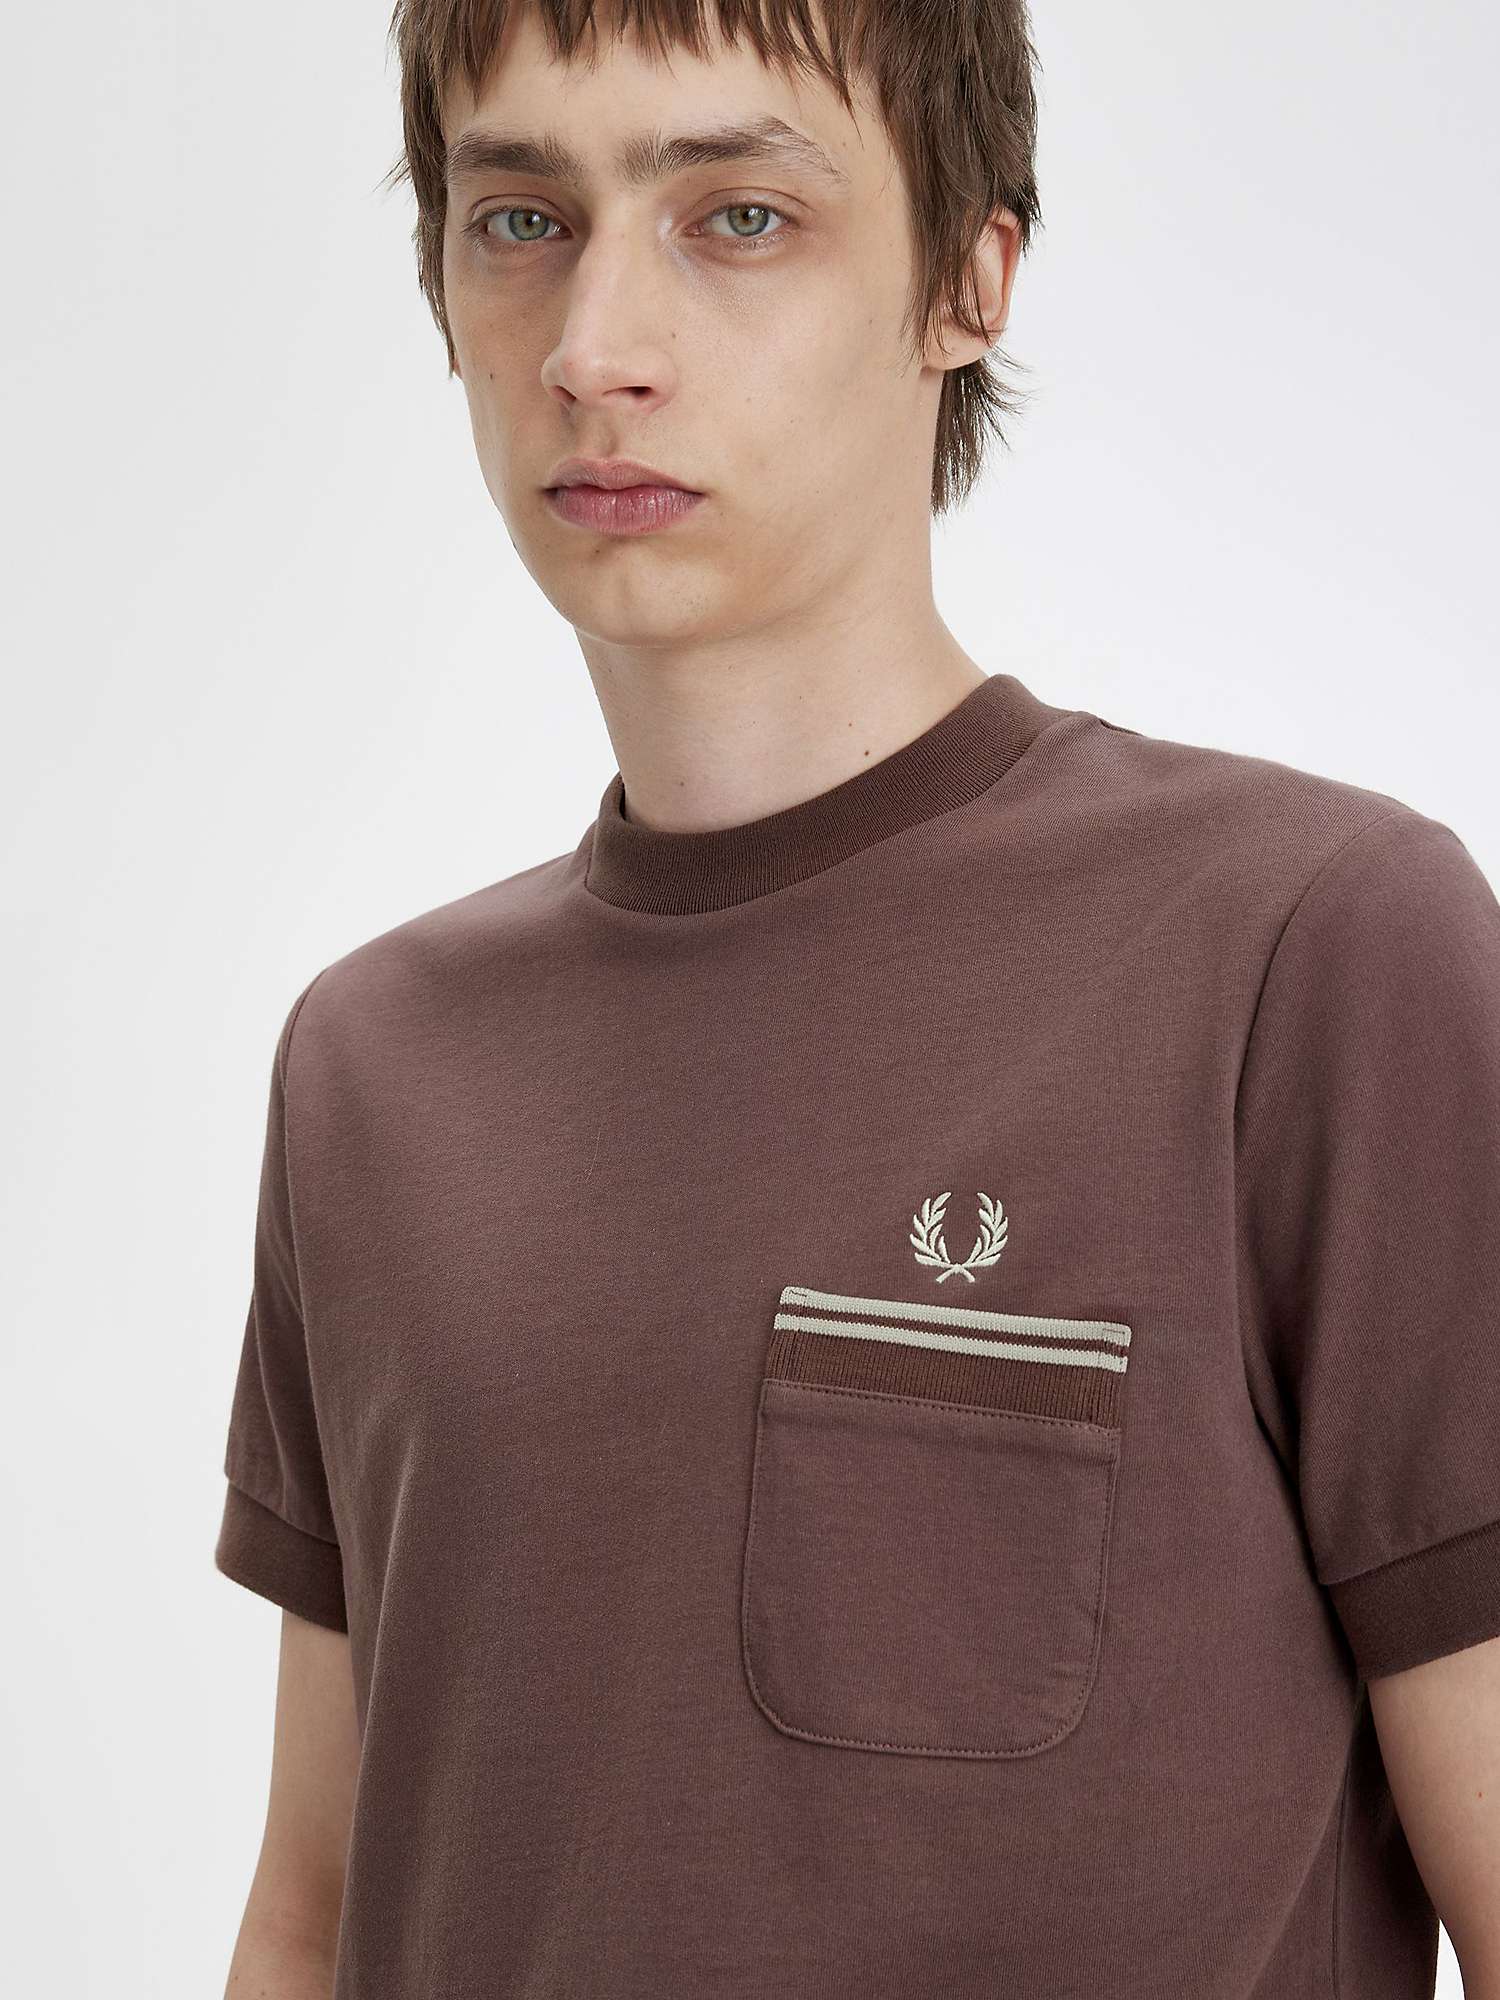 Buy Fred Perry Cotton Crew Neck T-Shirt, Red Online at johnlewis.com